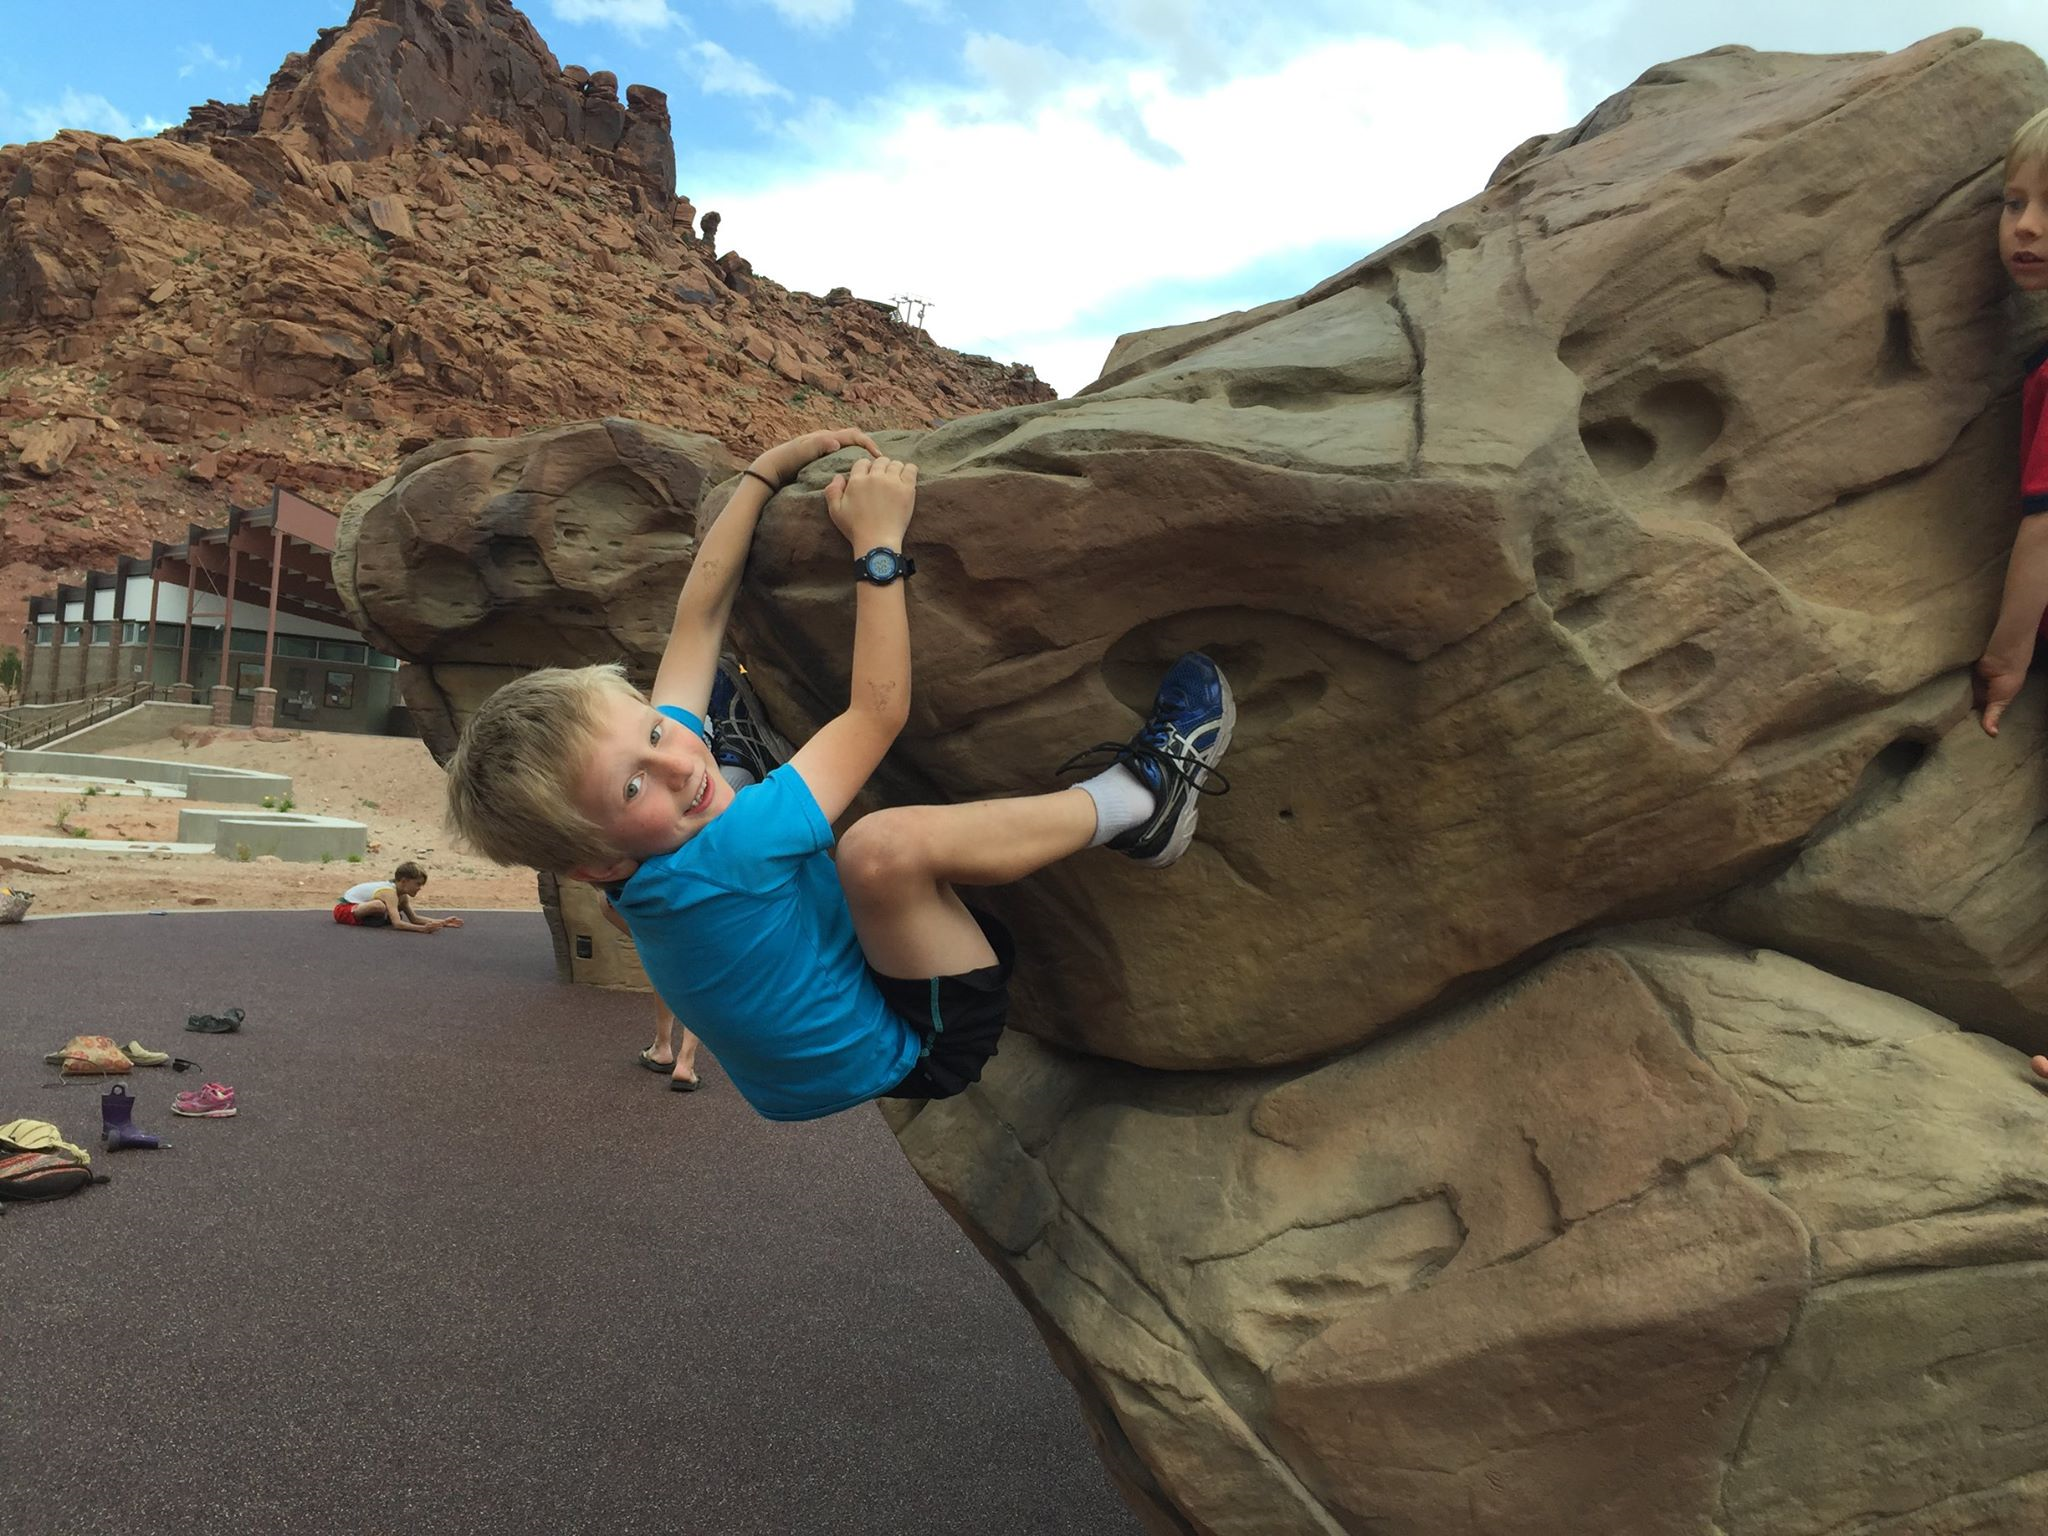 Play Boulders: Relationship between climbing exercise and children’s health